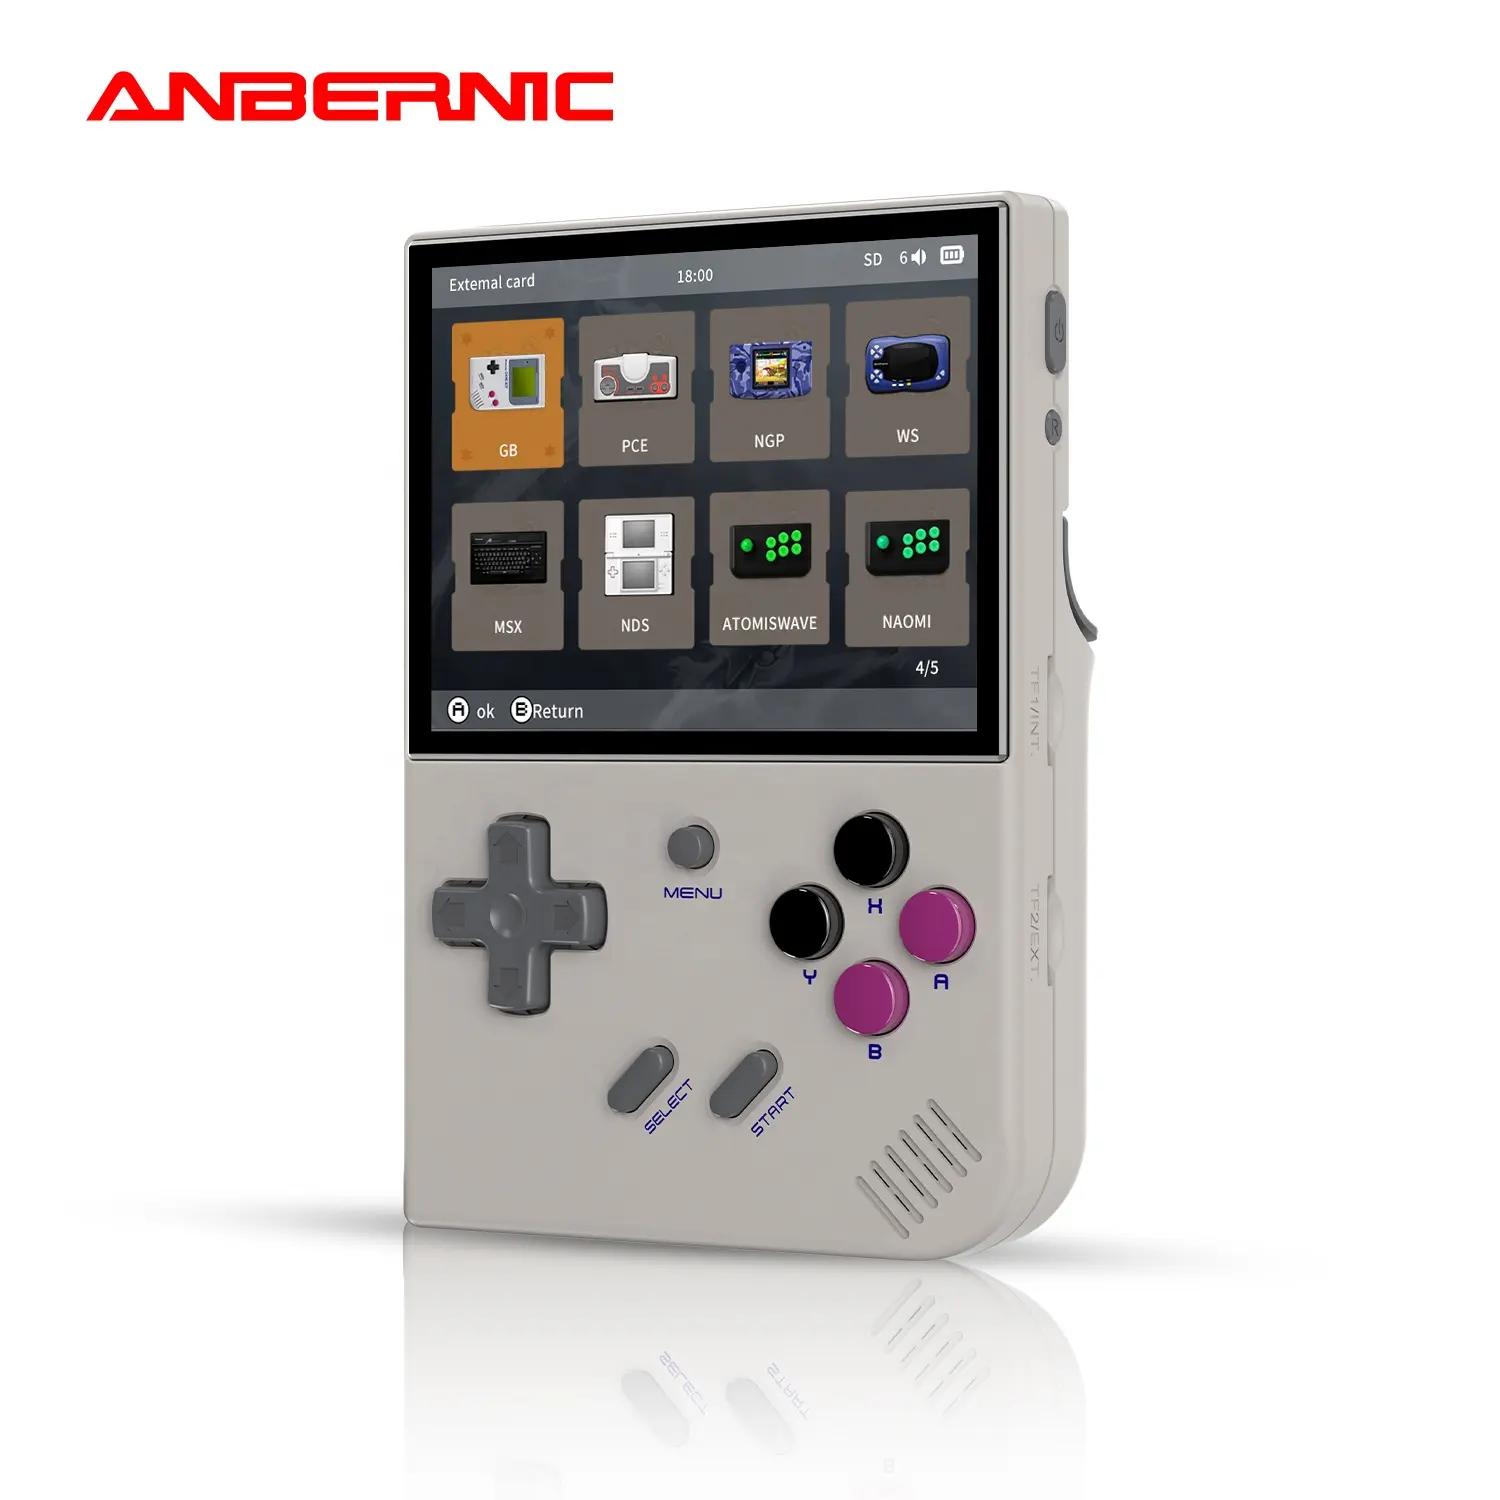 ANBERNIC RG35XX Plus Hand Held Game Consoles Mini Game Console Support PSP PS1 Handheld Game Player Lasting 8 Hours